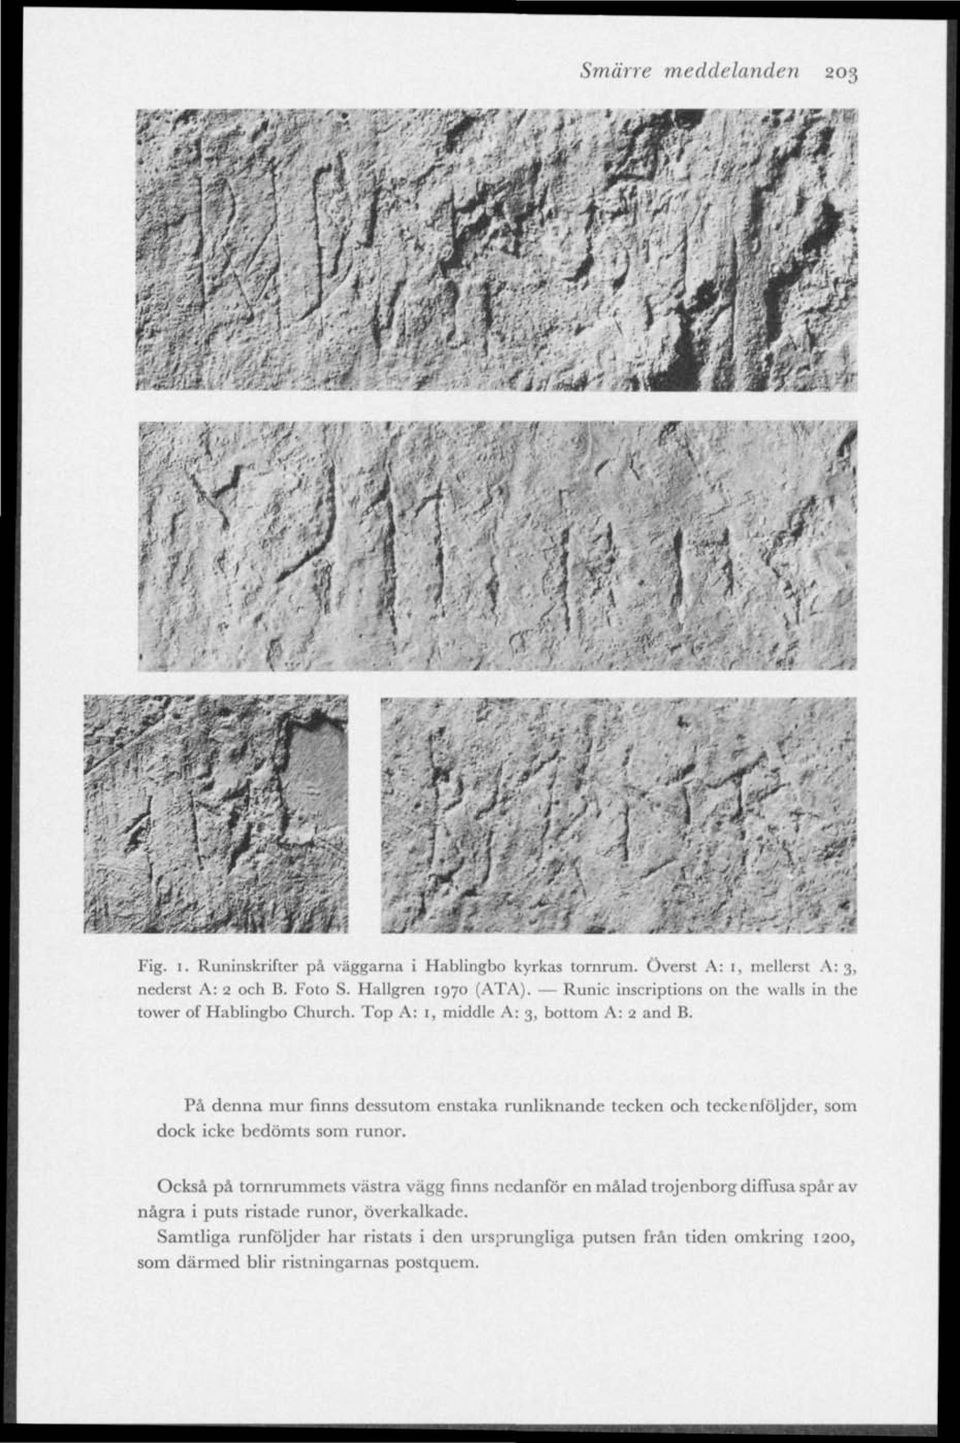 Runic inscriptions on the walls in the tower of Hablingbo Church. Top A: 1, middle A: 3, bottom A: 2 and B.